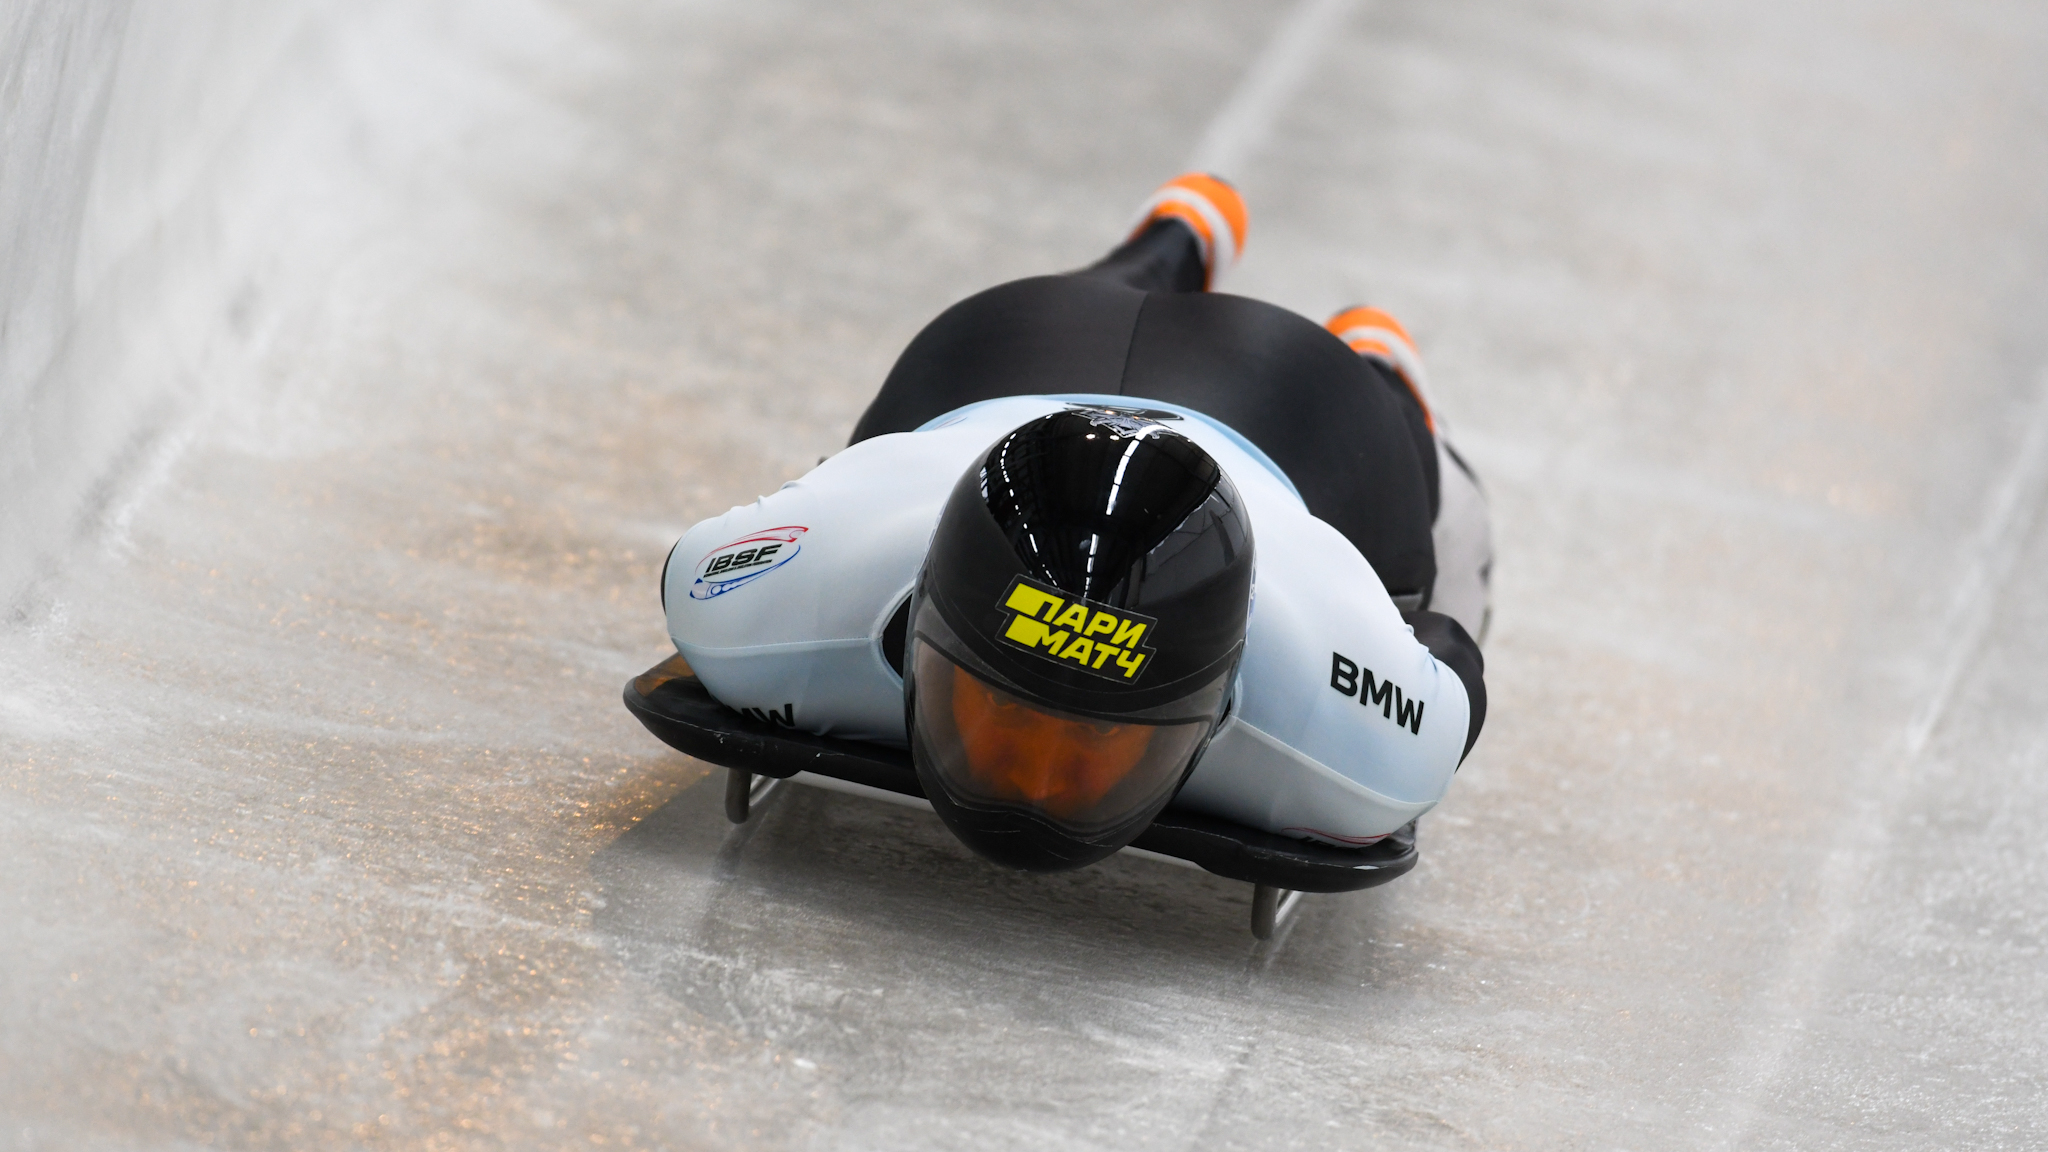 Tretiakov and Lölling lead at halfway mark of skeleton competition at IBSF World Championships